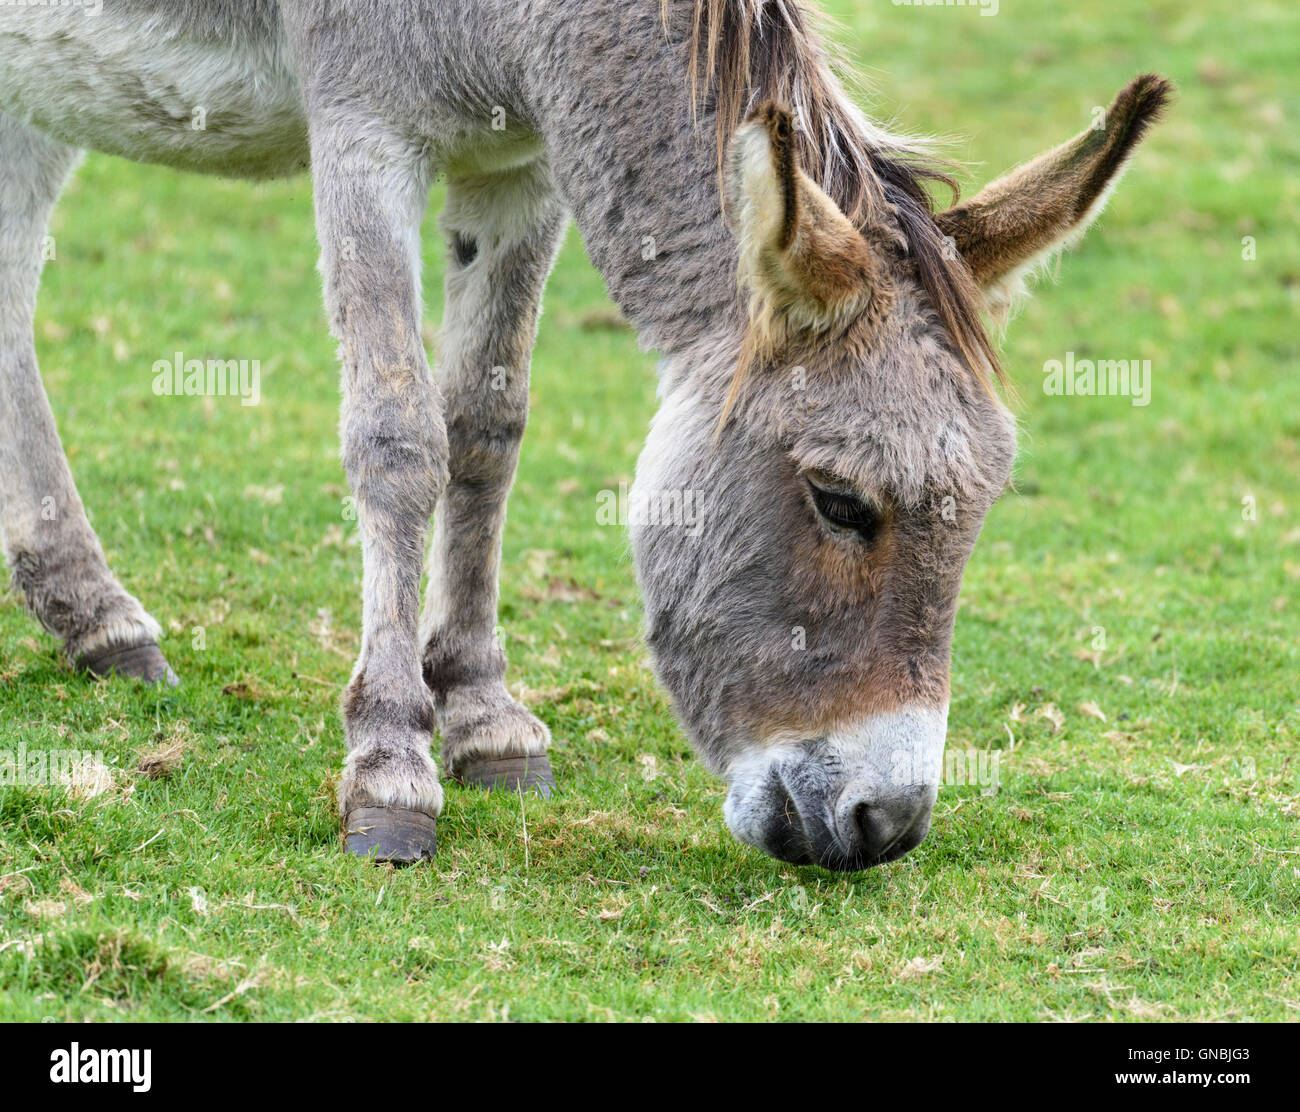 Head, neck & forelegs of a gray donkey grazing on grass Stock Photo